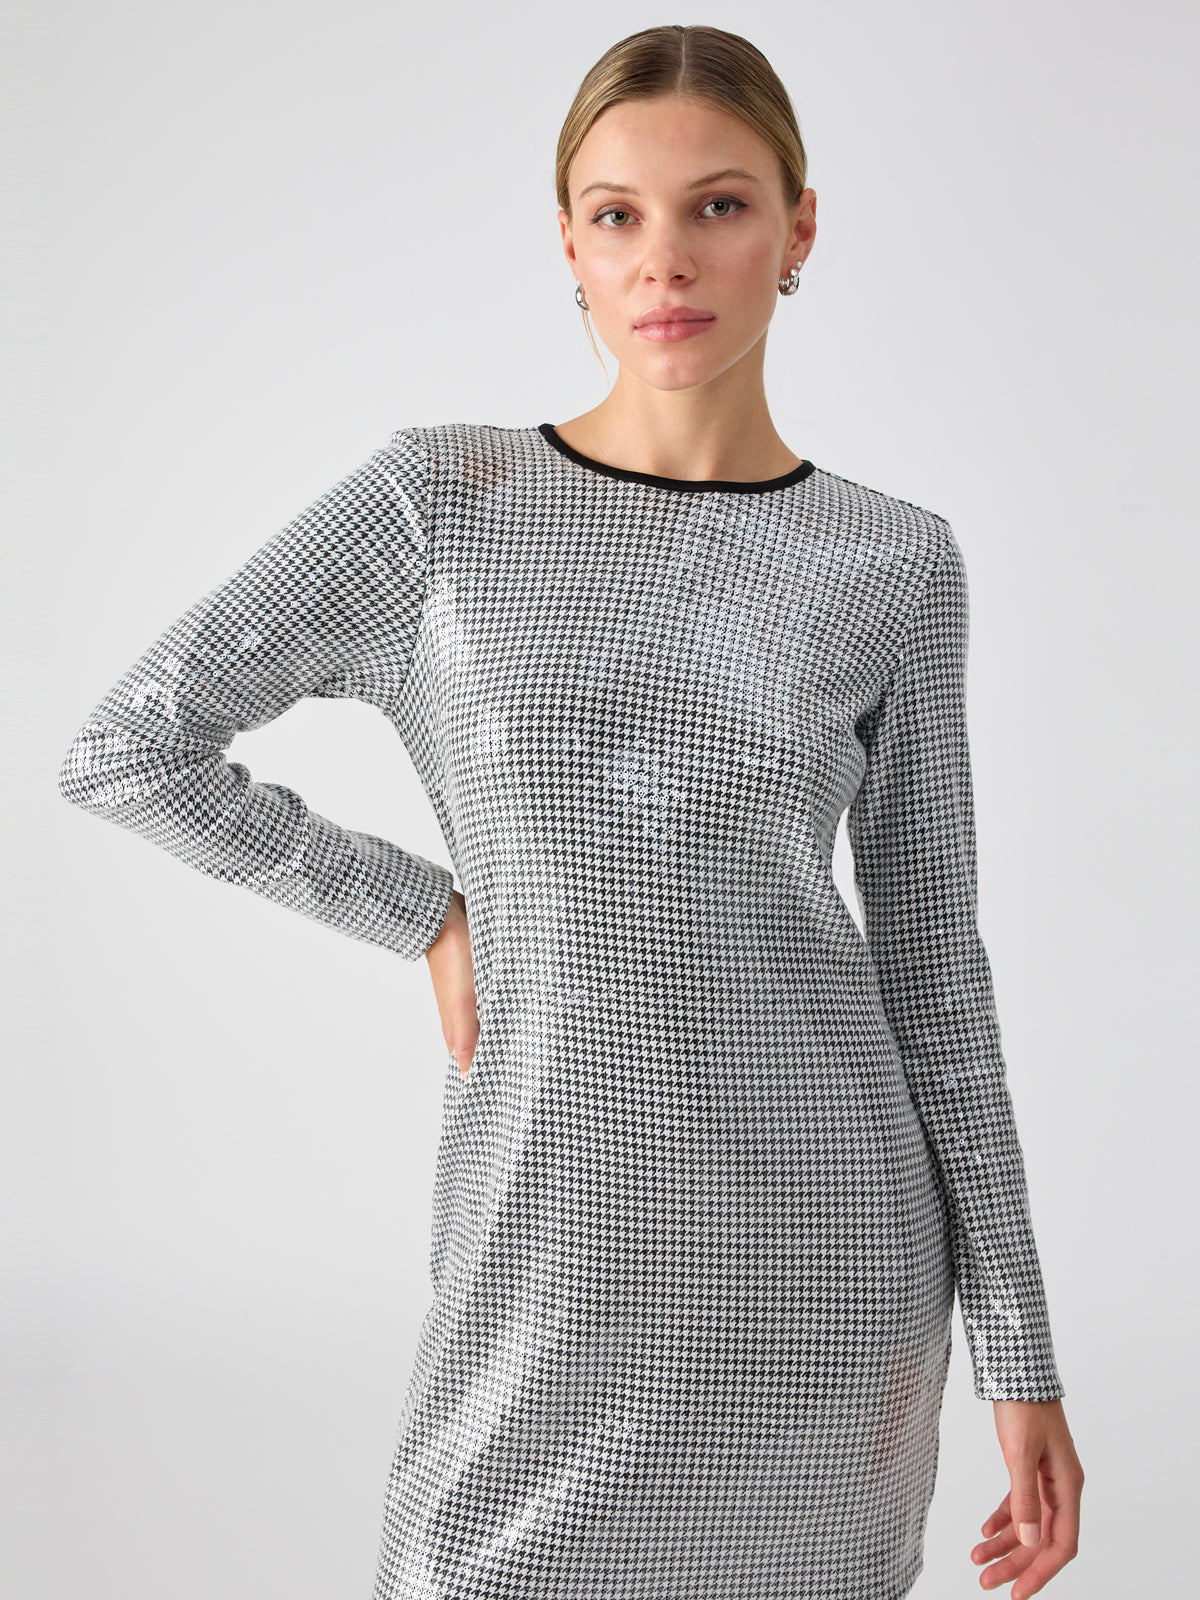 Dance Moves Sequin Dress Micro Houndstooth